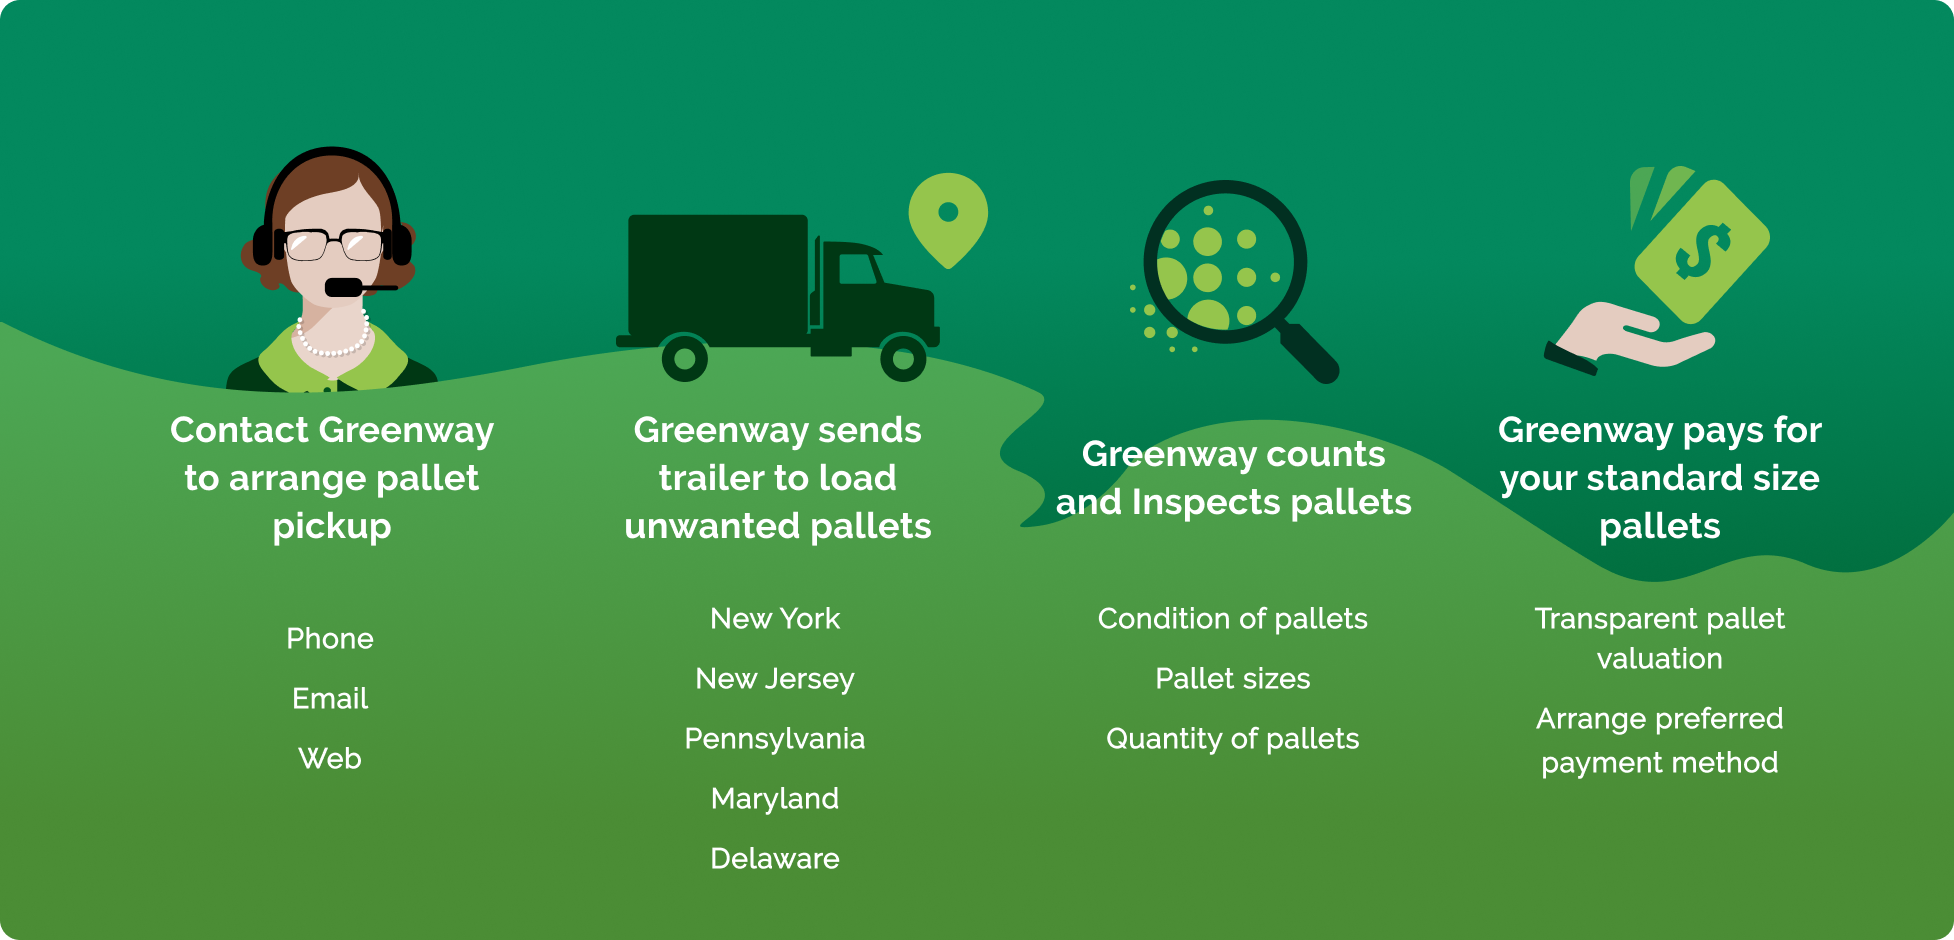 Greenway Buys Excess Pallets in Bulk